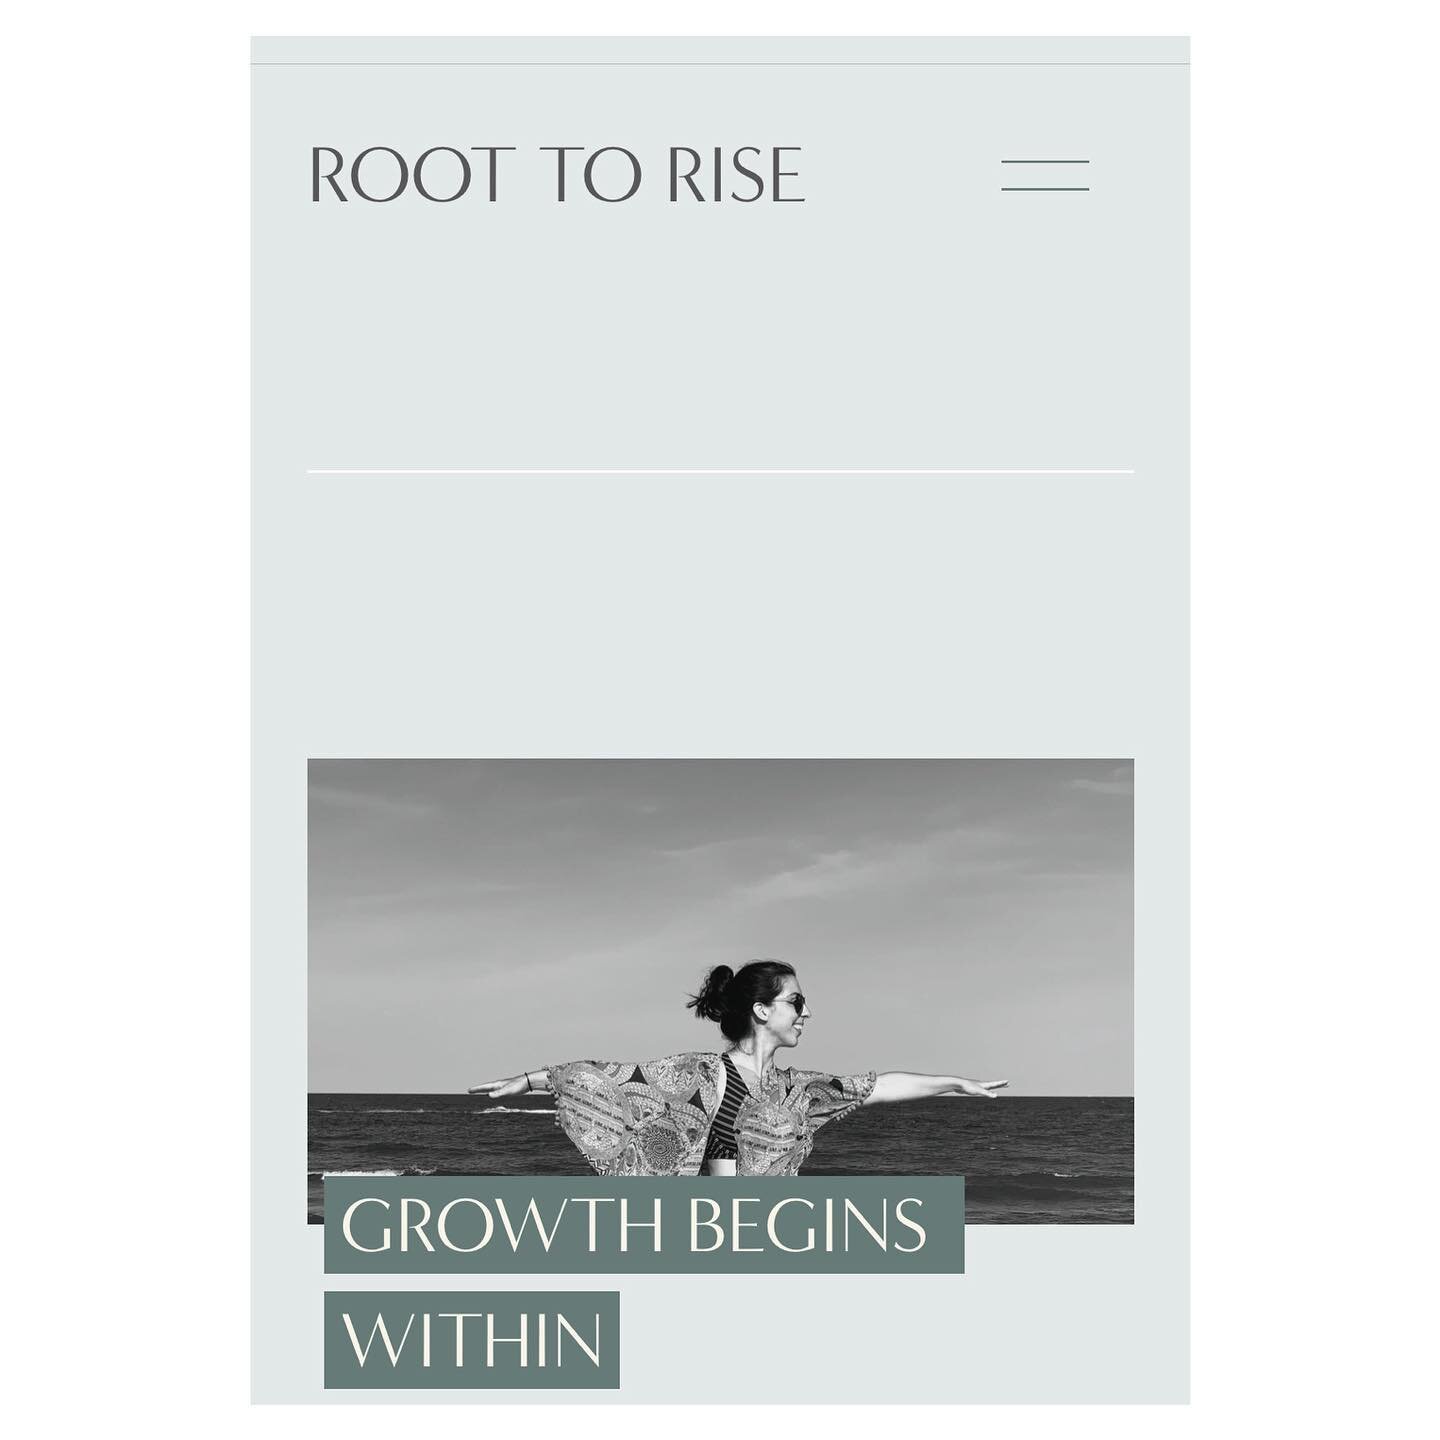 Introducing: Root to Rise

Many months, maybe years in the making. Part of my personal growth in 2021 was to move beyond perfectionism to share my gifts with the world. So, here she is, ready to bring you personalized yoga and wellness. 

Current off